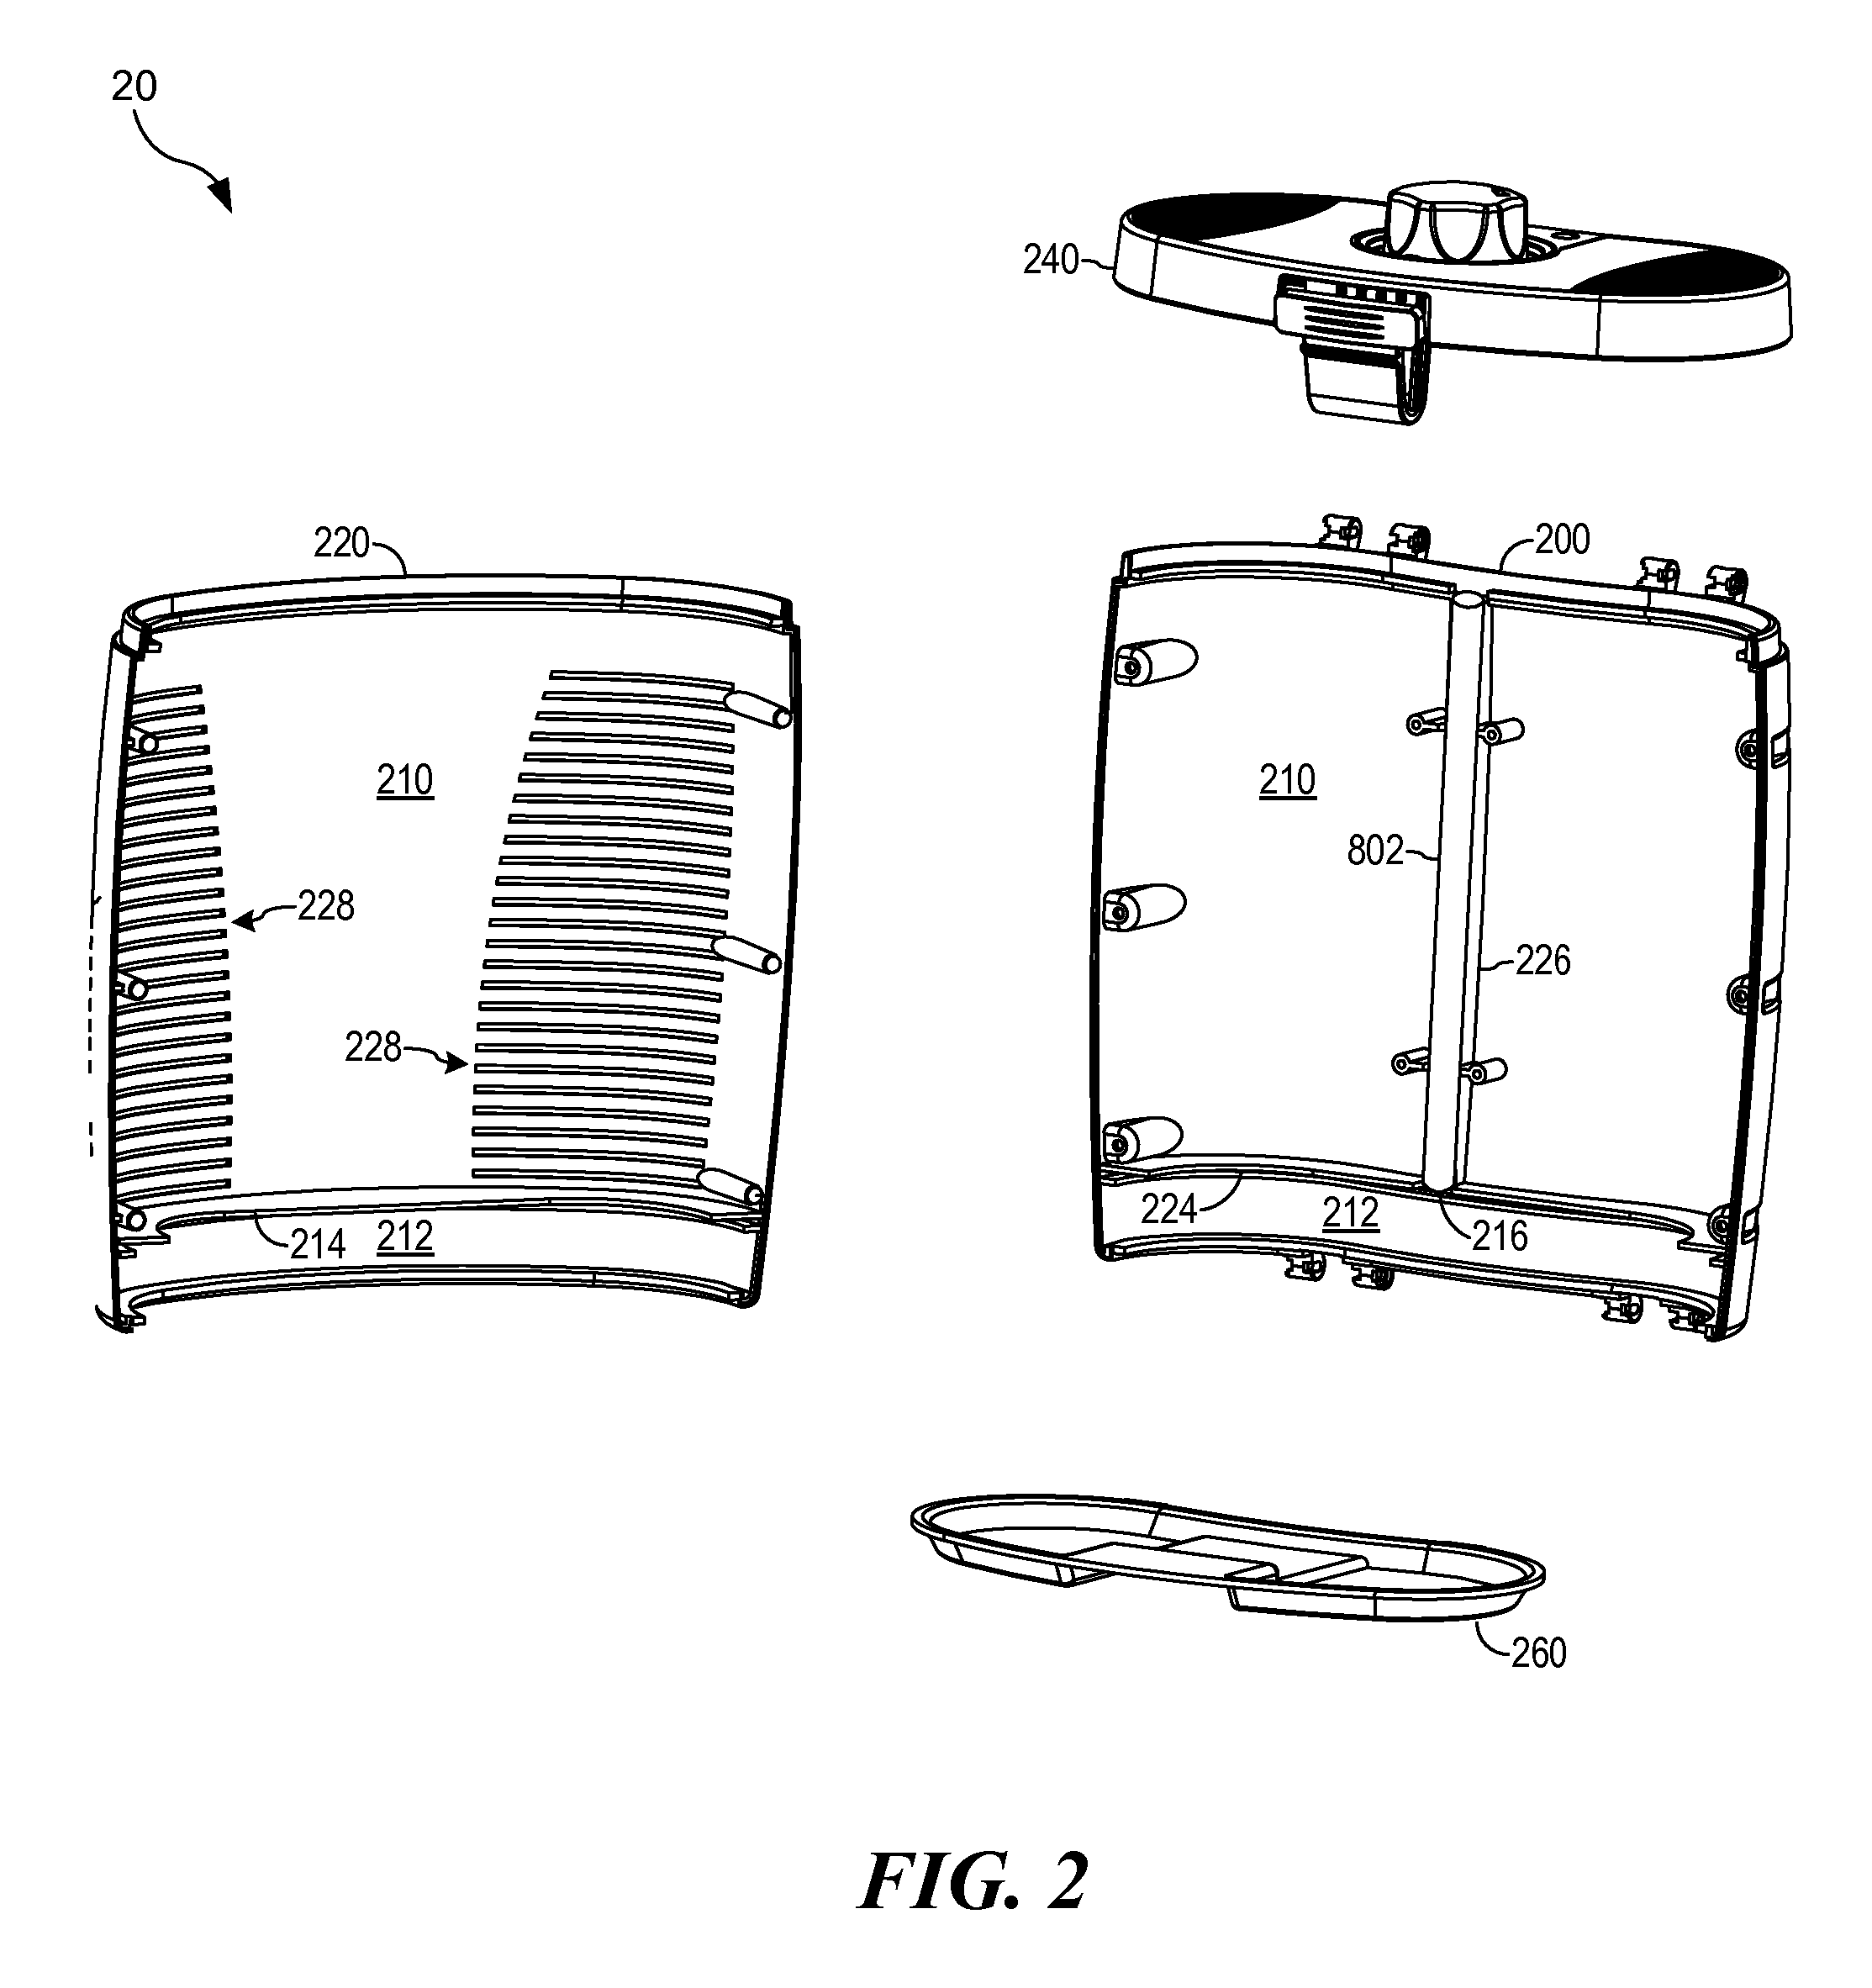 Method and apparatus for portable self contained re-breathing devices